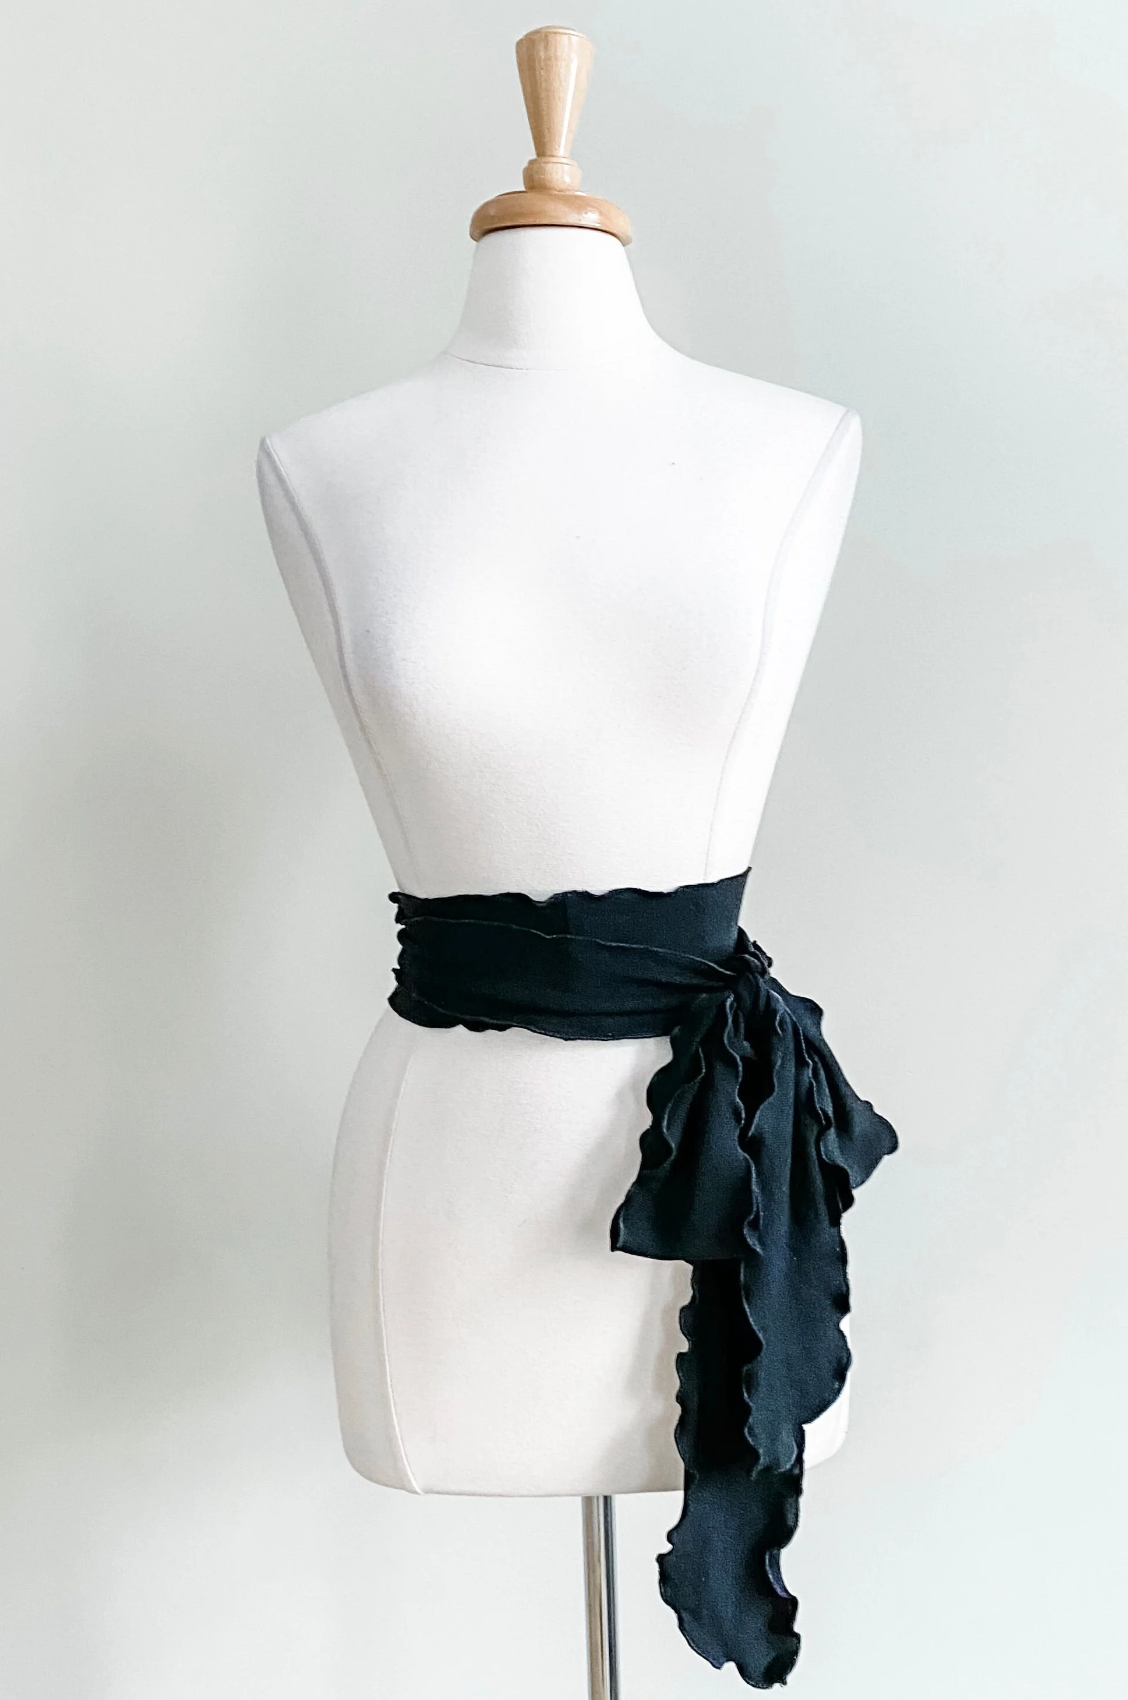 Matching Sash in Black color from Diane Kroe